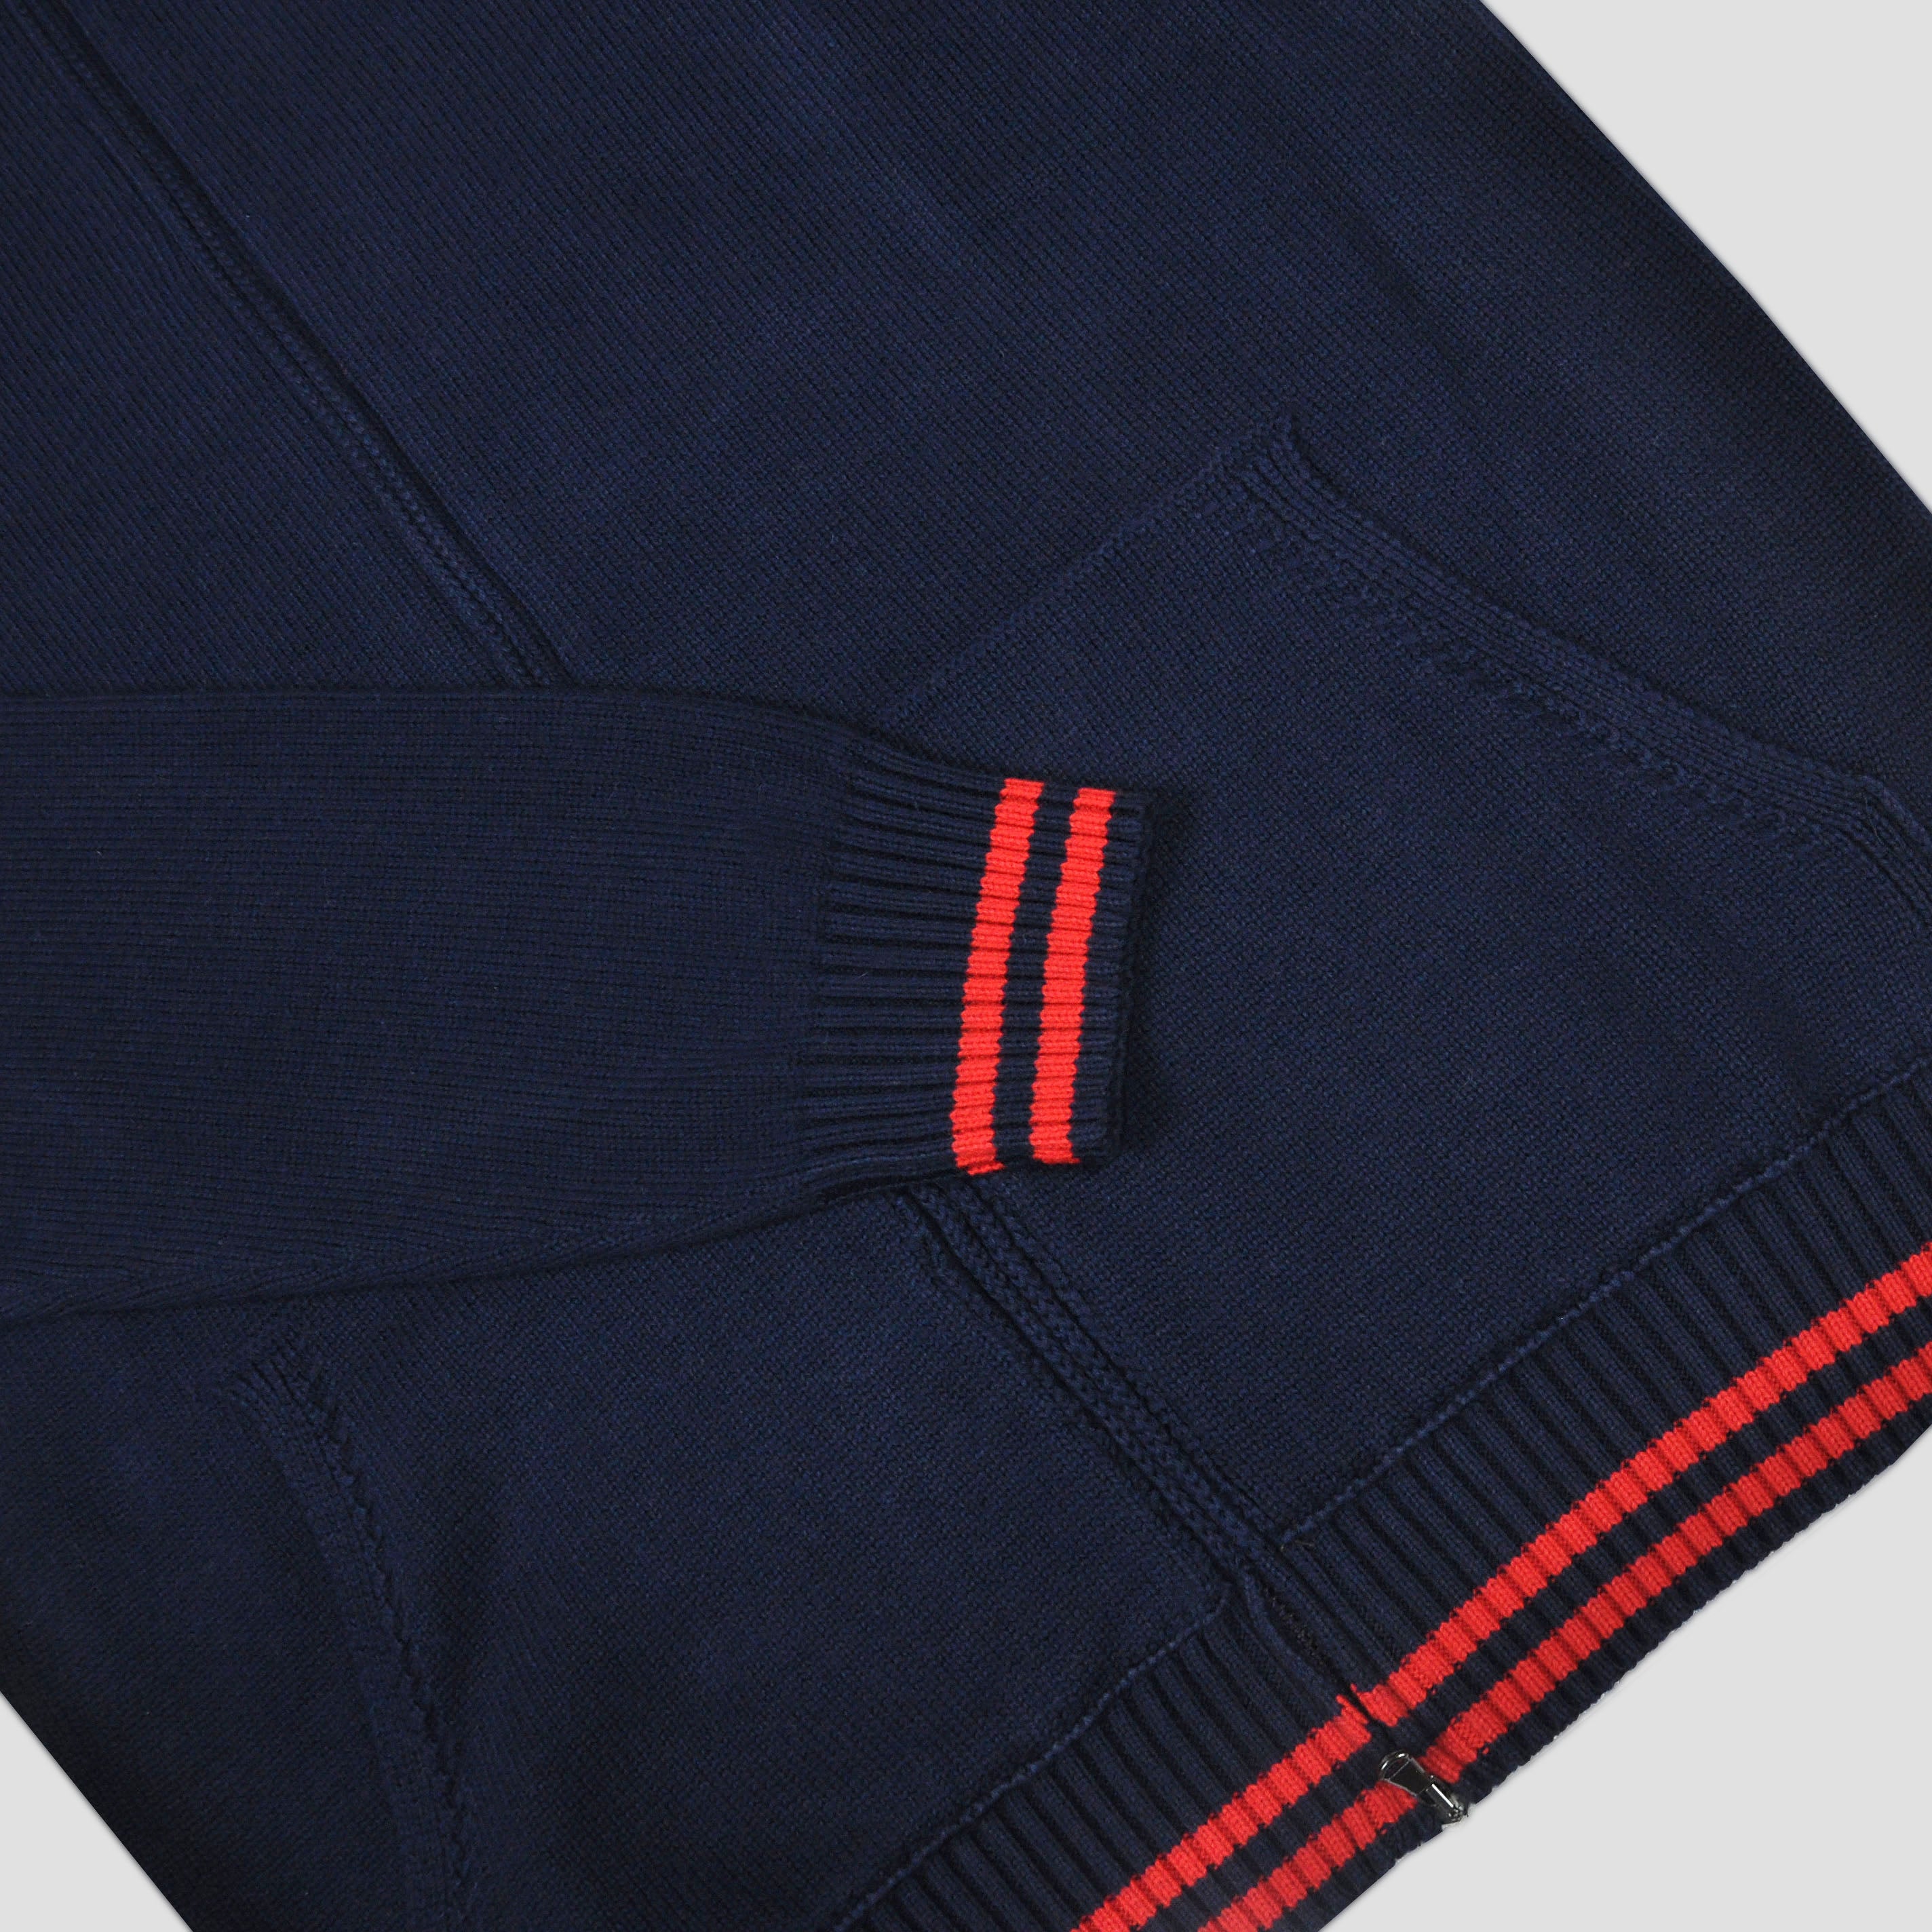 Cotton Zip-up Hooded Jumper in Dark Blue with Red Bands